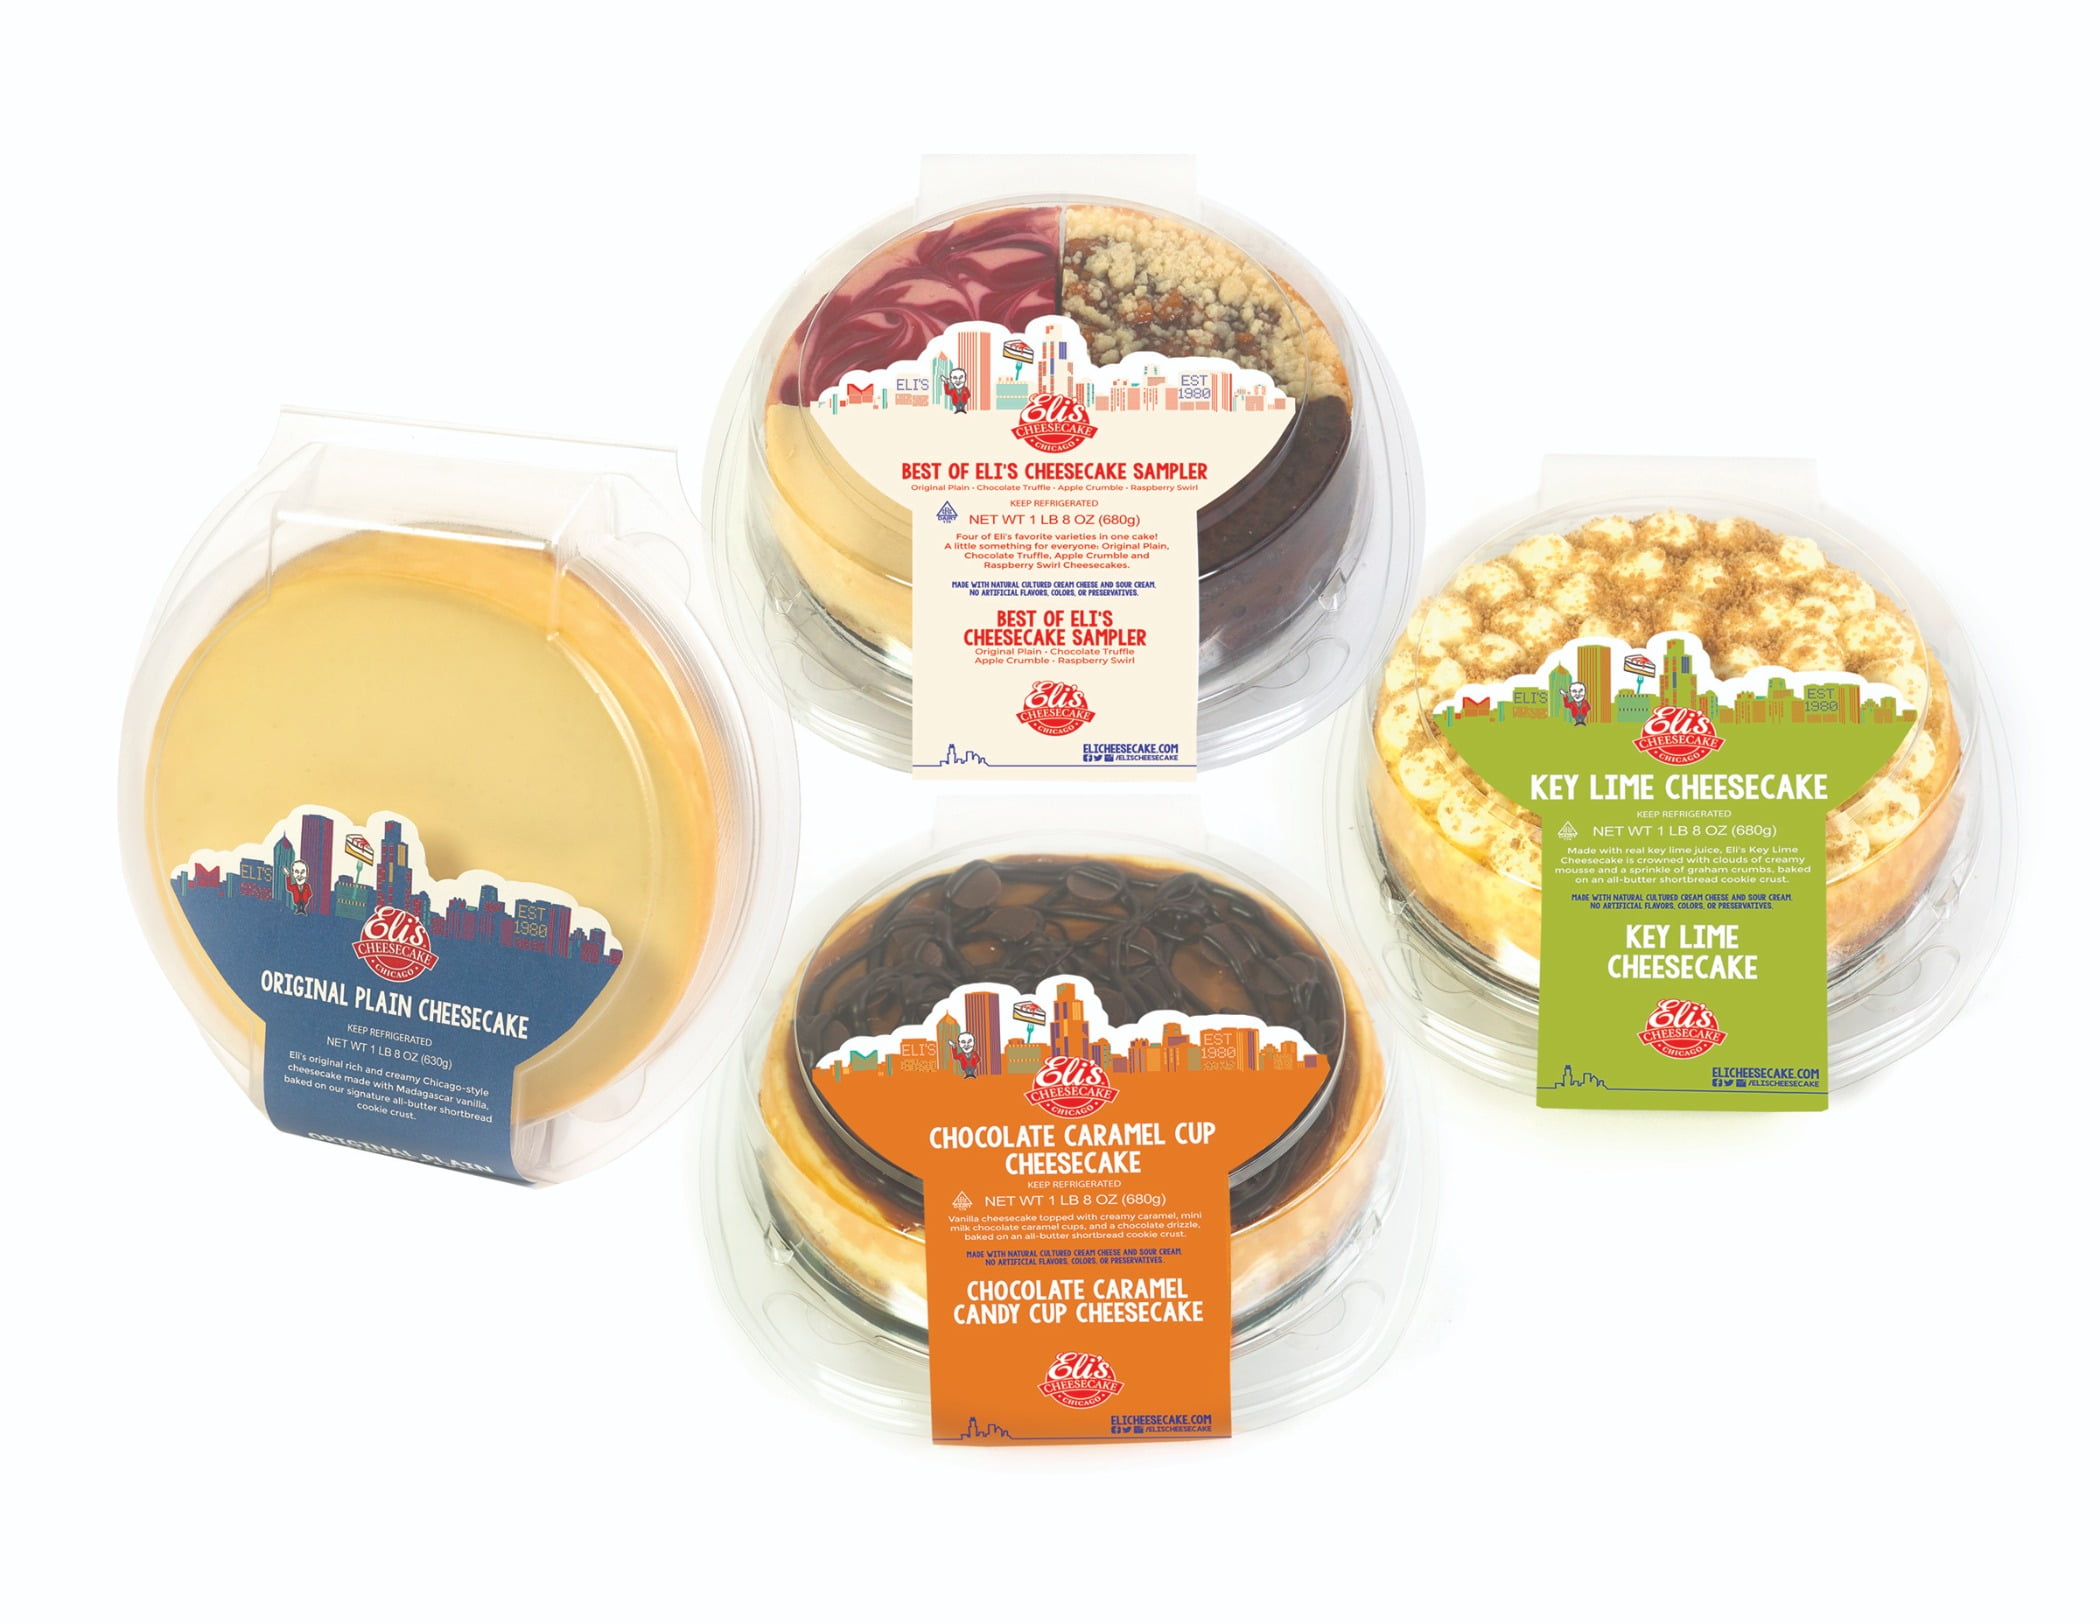 Product, Cheesecake, Ingredient, Font, Packaging, Containers, Labels